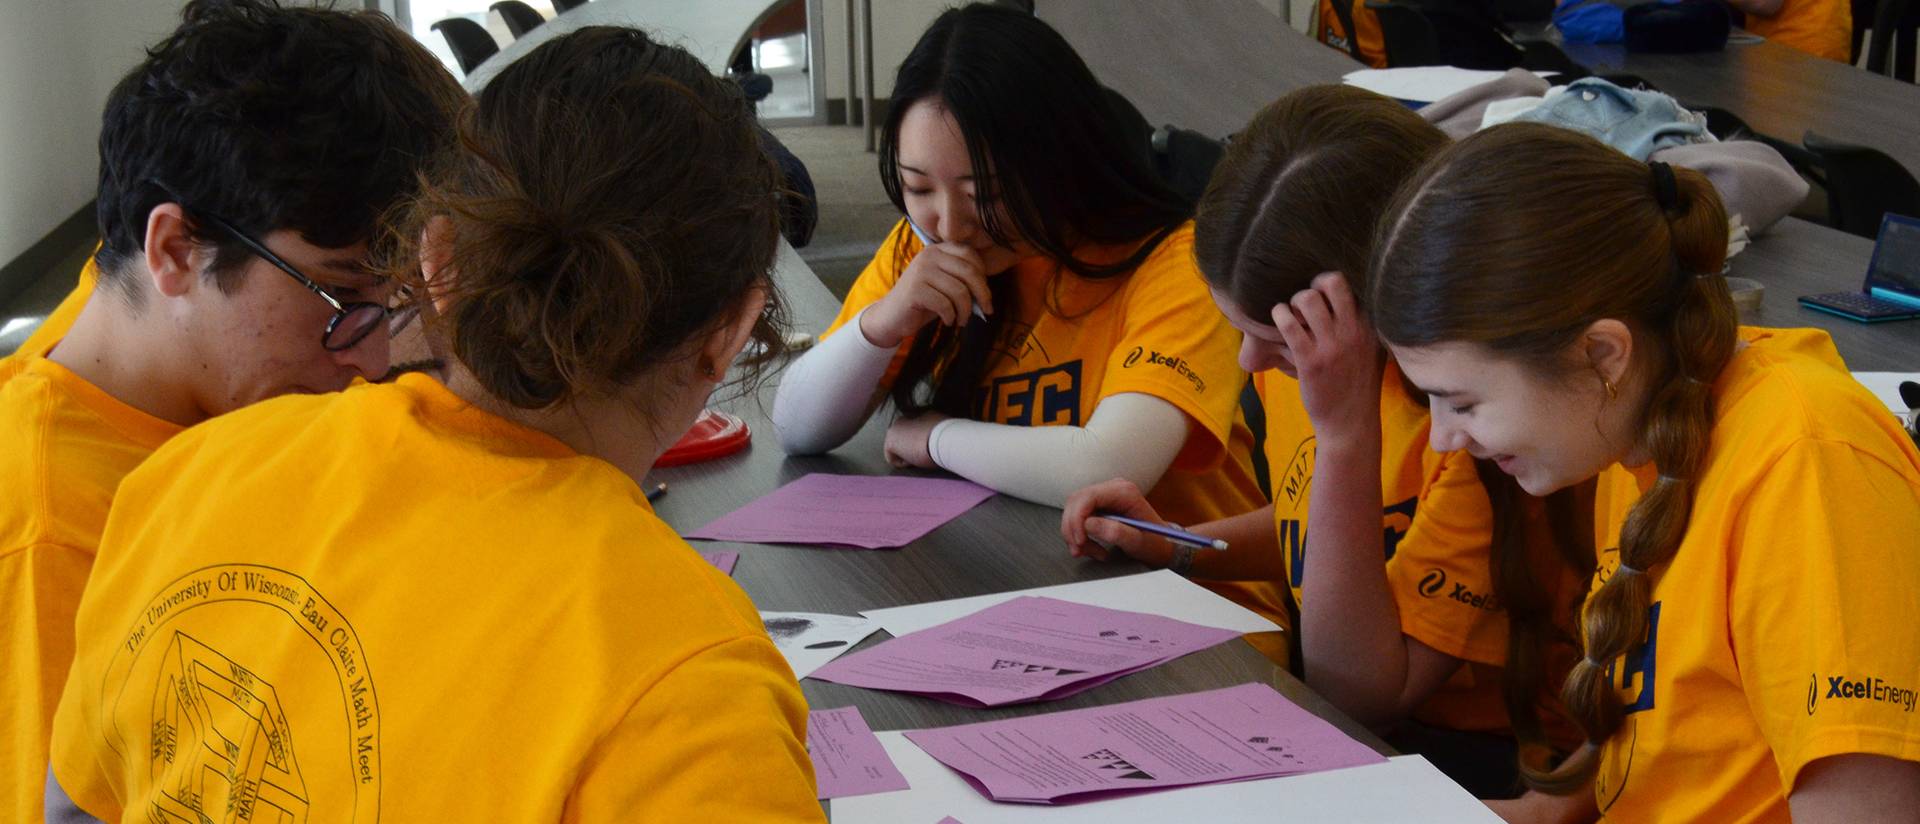 Area high school students working together at the 40th Annual Mathematics Meet